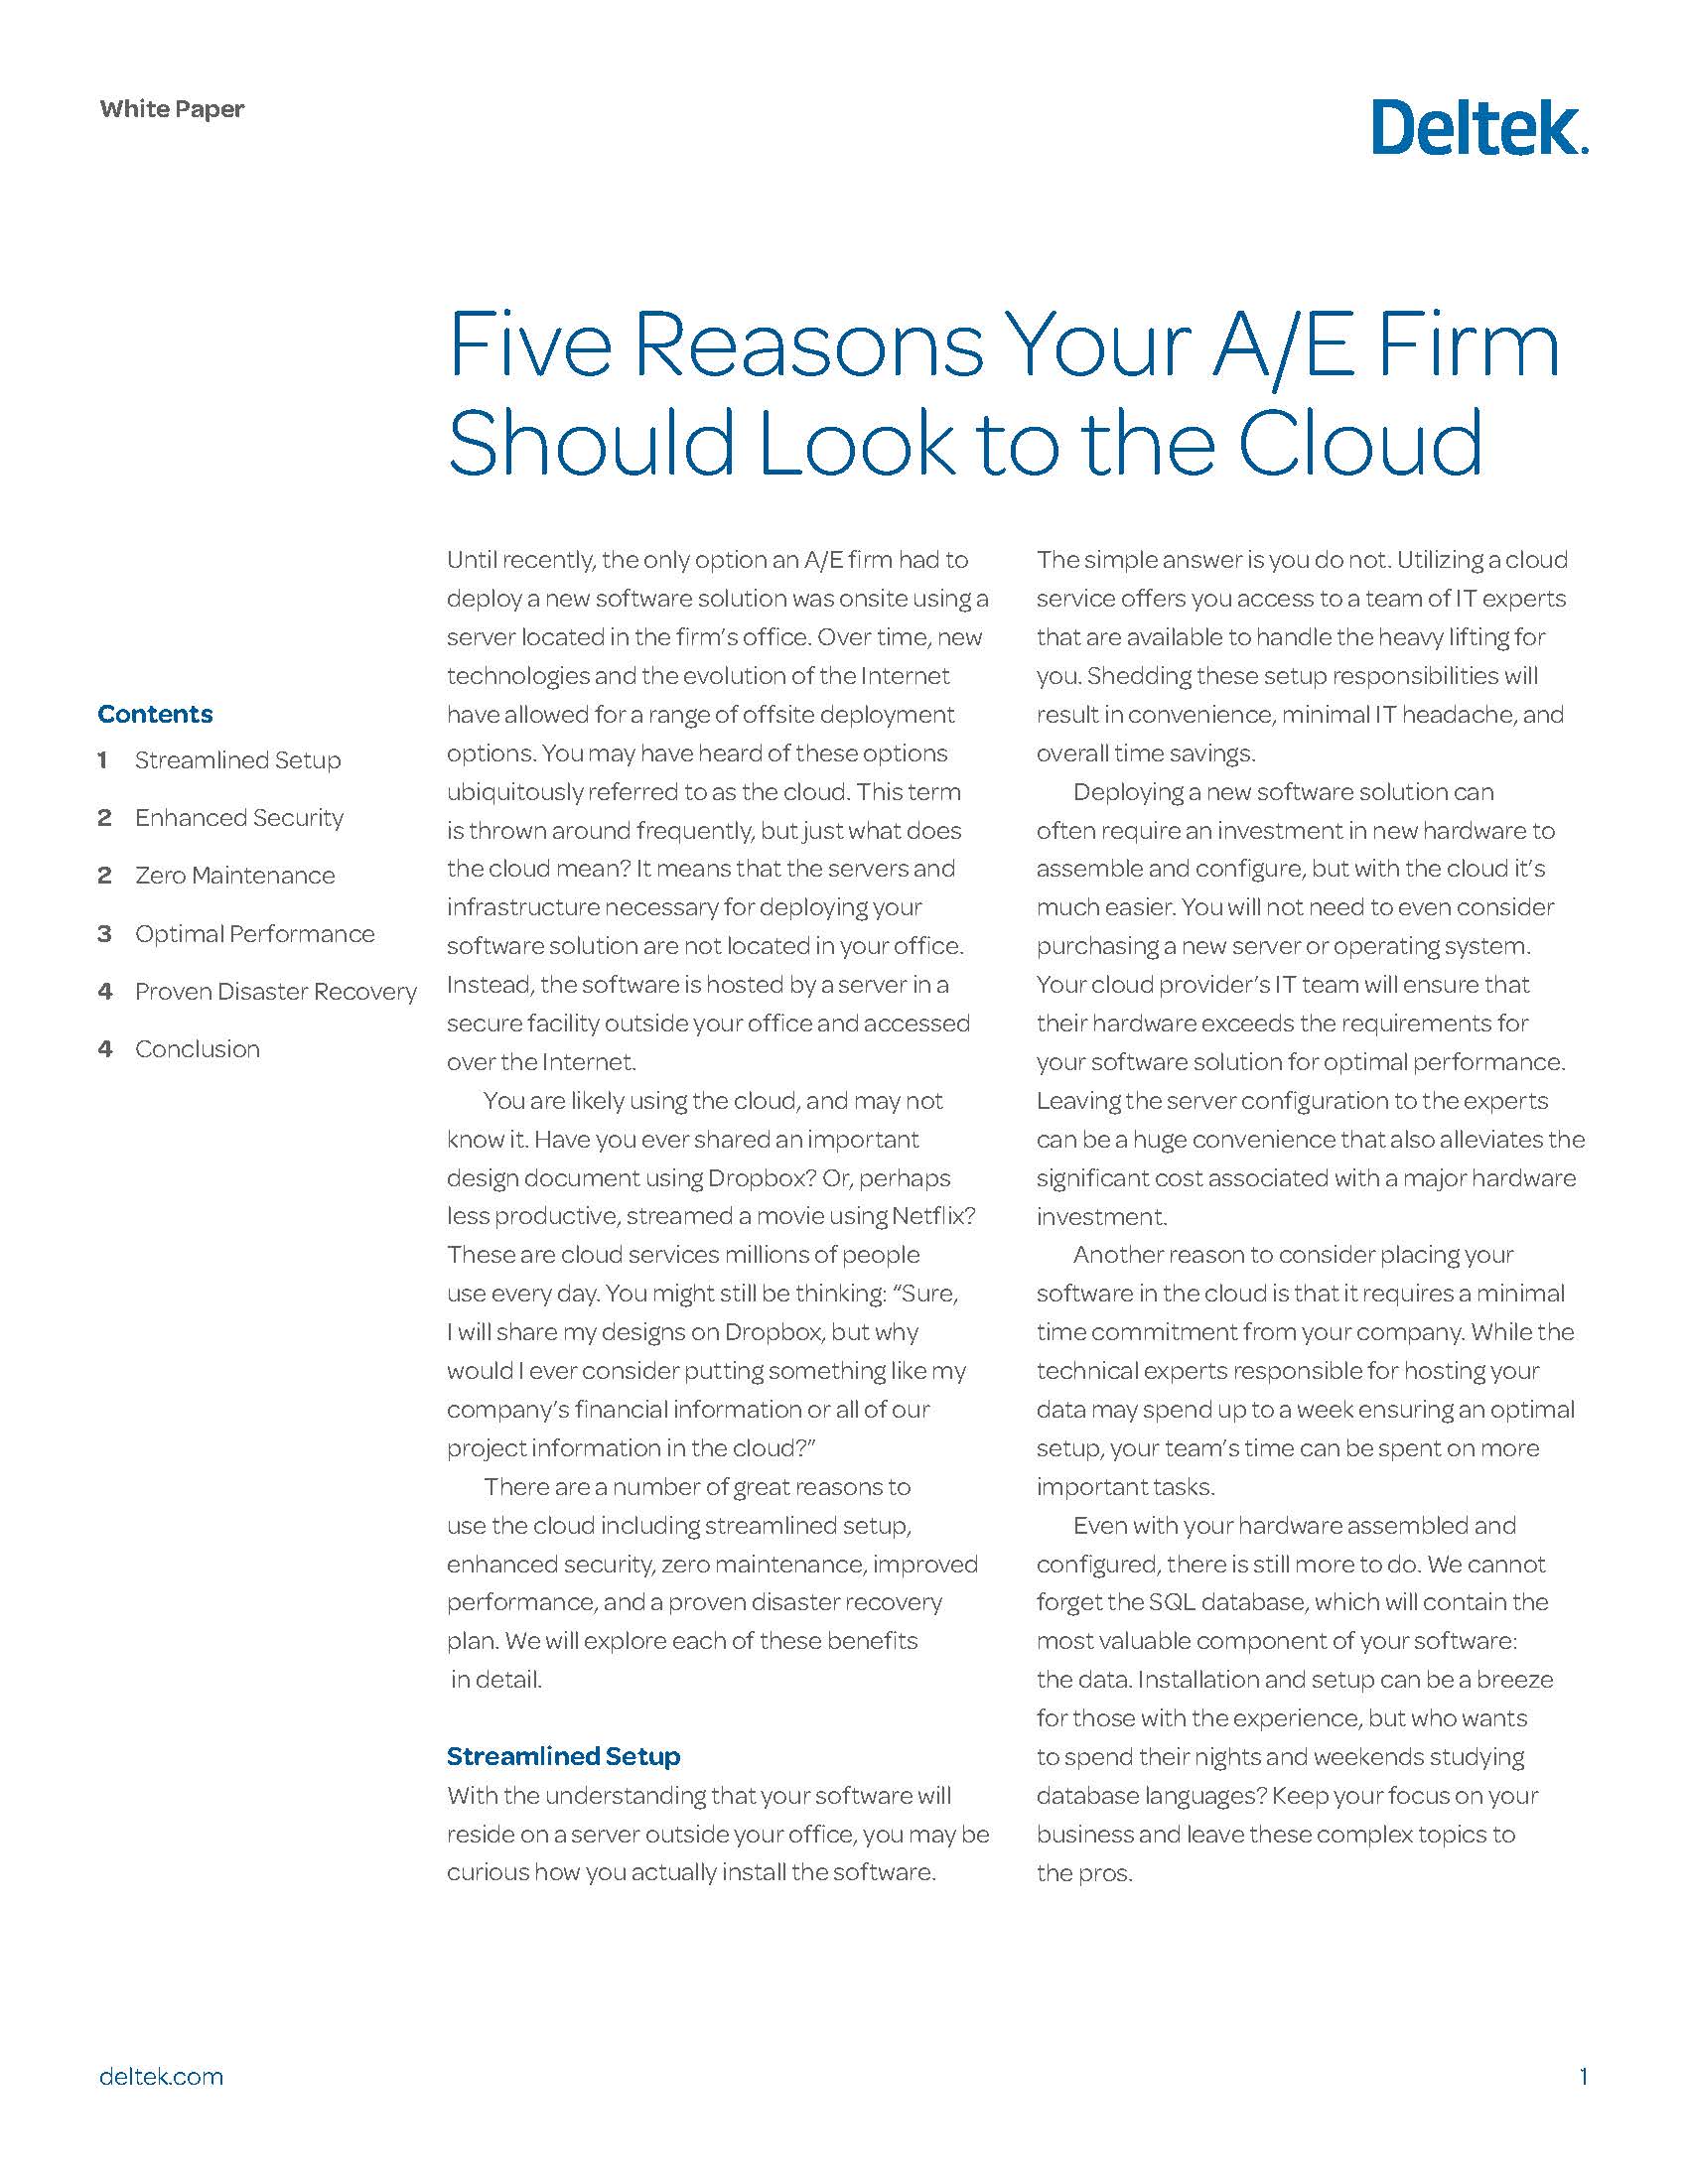 Five Reasons Your A&E Firm Should Look to the Cloud